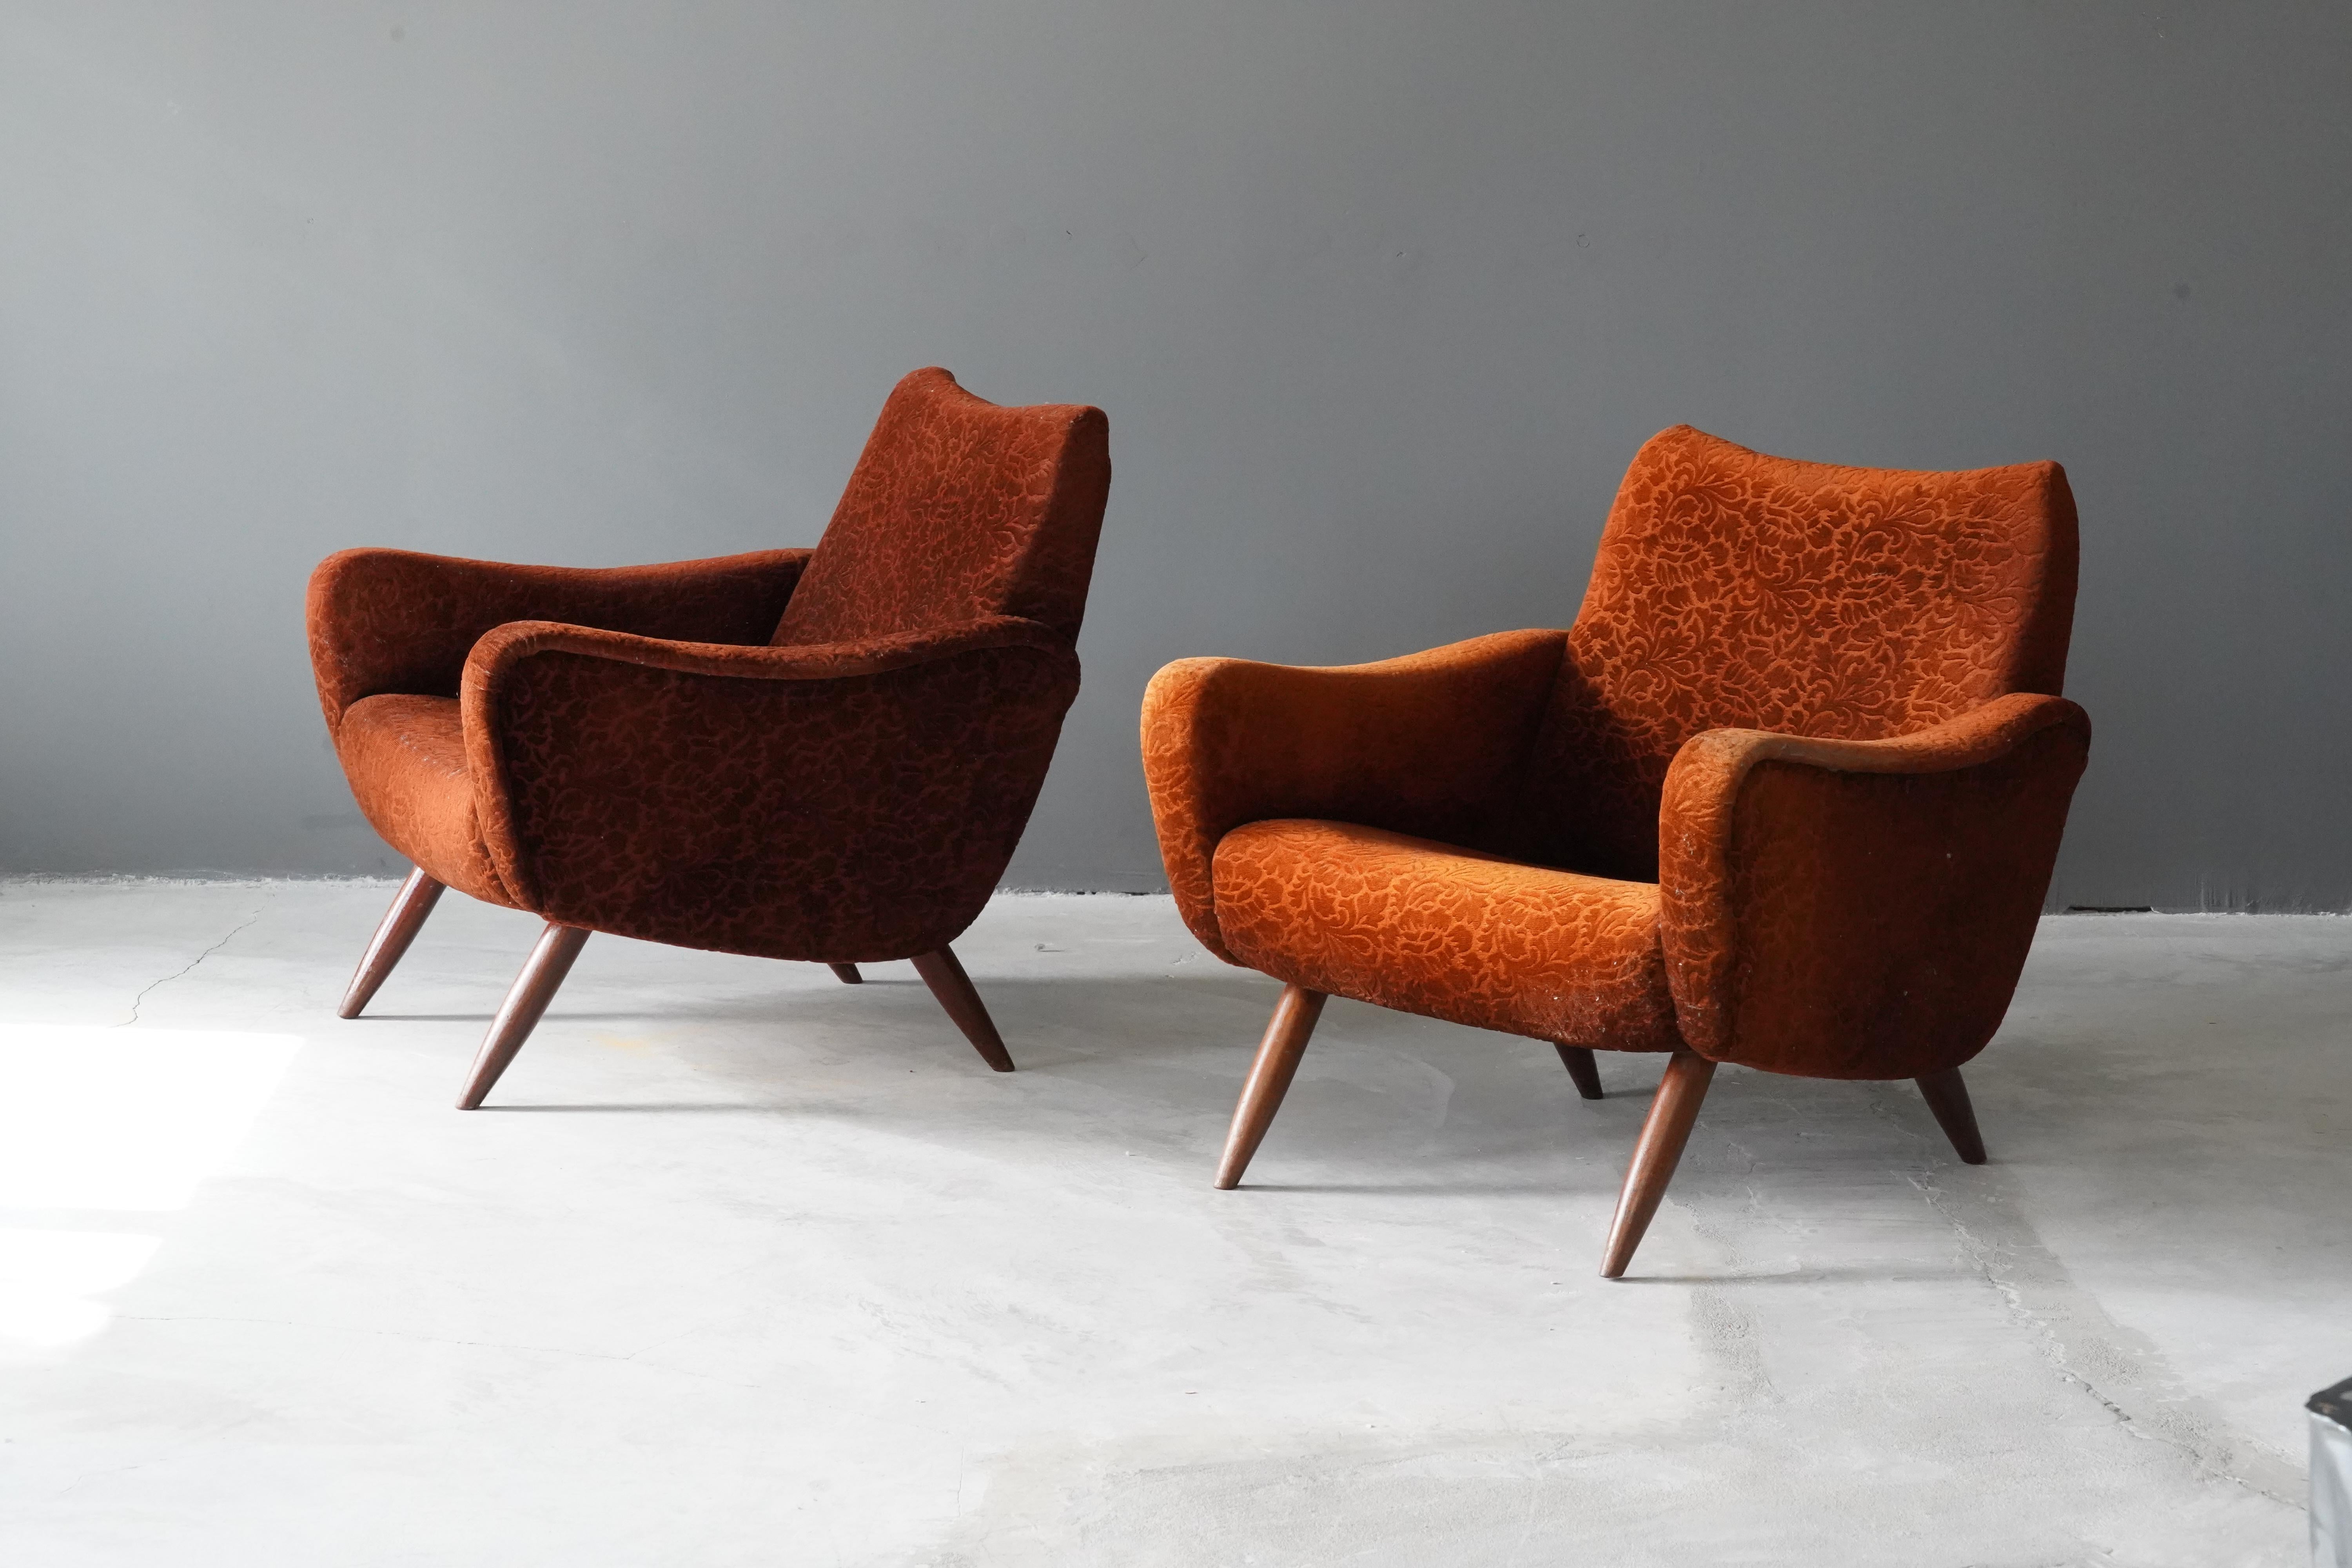 A pair of freeform lounge chairs / armchairs, designed by Kurt Hvitsjö for Isku, Finland, 1950s.

Features an overstuffed wooden structure on finely turned wooden legs. 

Other designers of the period include Gio Ponti, Alvar Aalto, Carlo